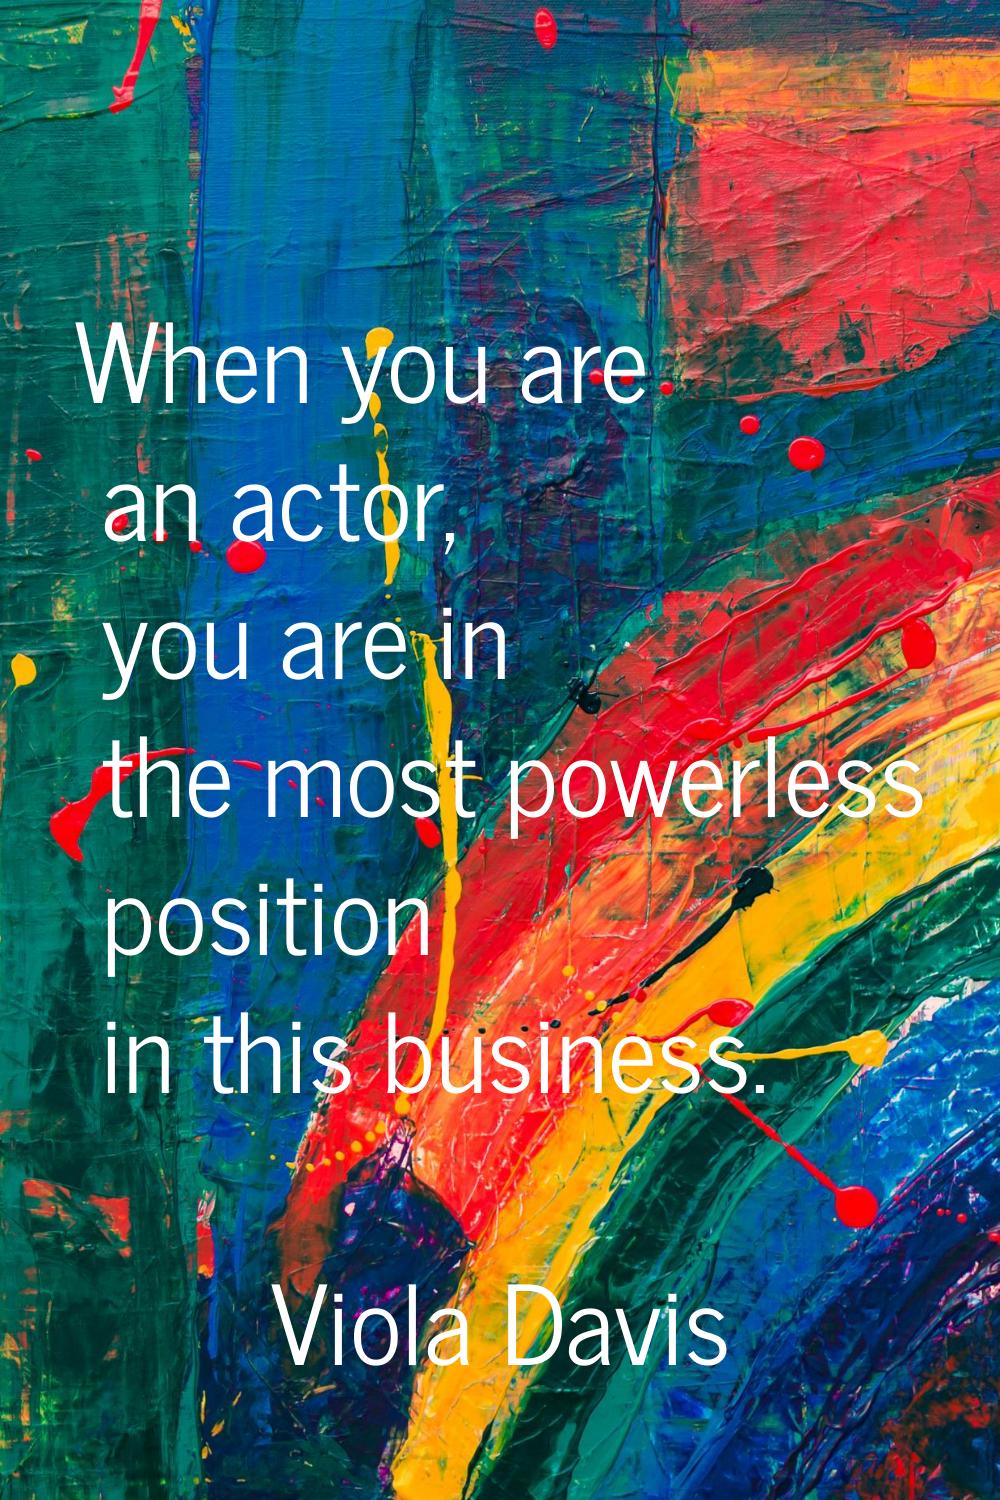 When you are an actor, you are in the most powerless position in this business.